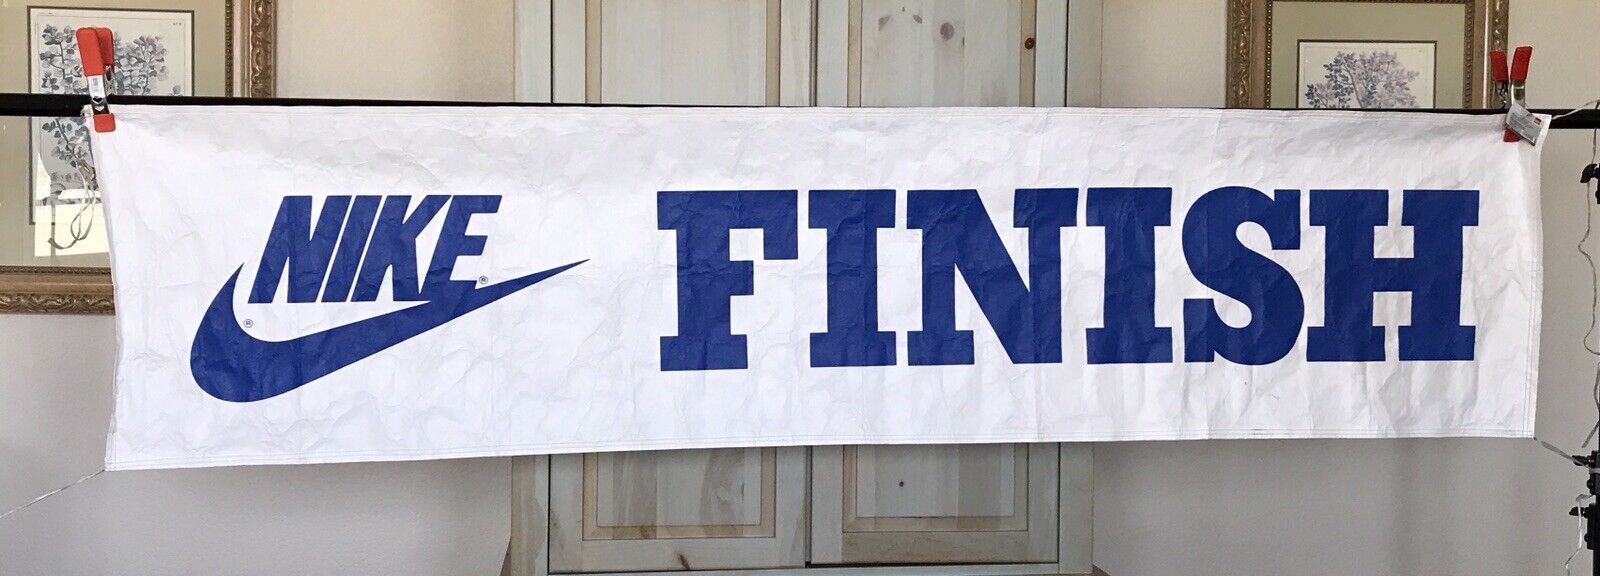 NIKE Vintage Banner Sign From Store Finish Blue White RARE